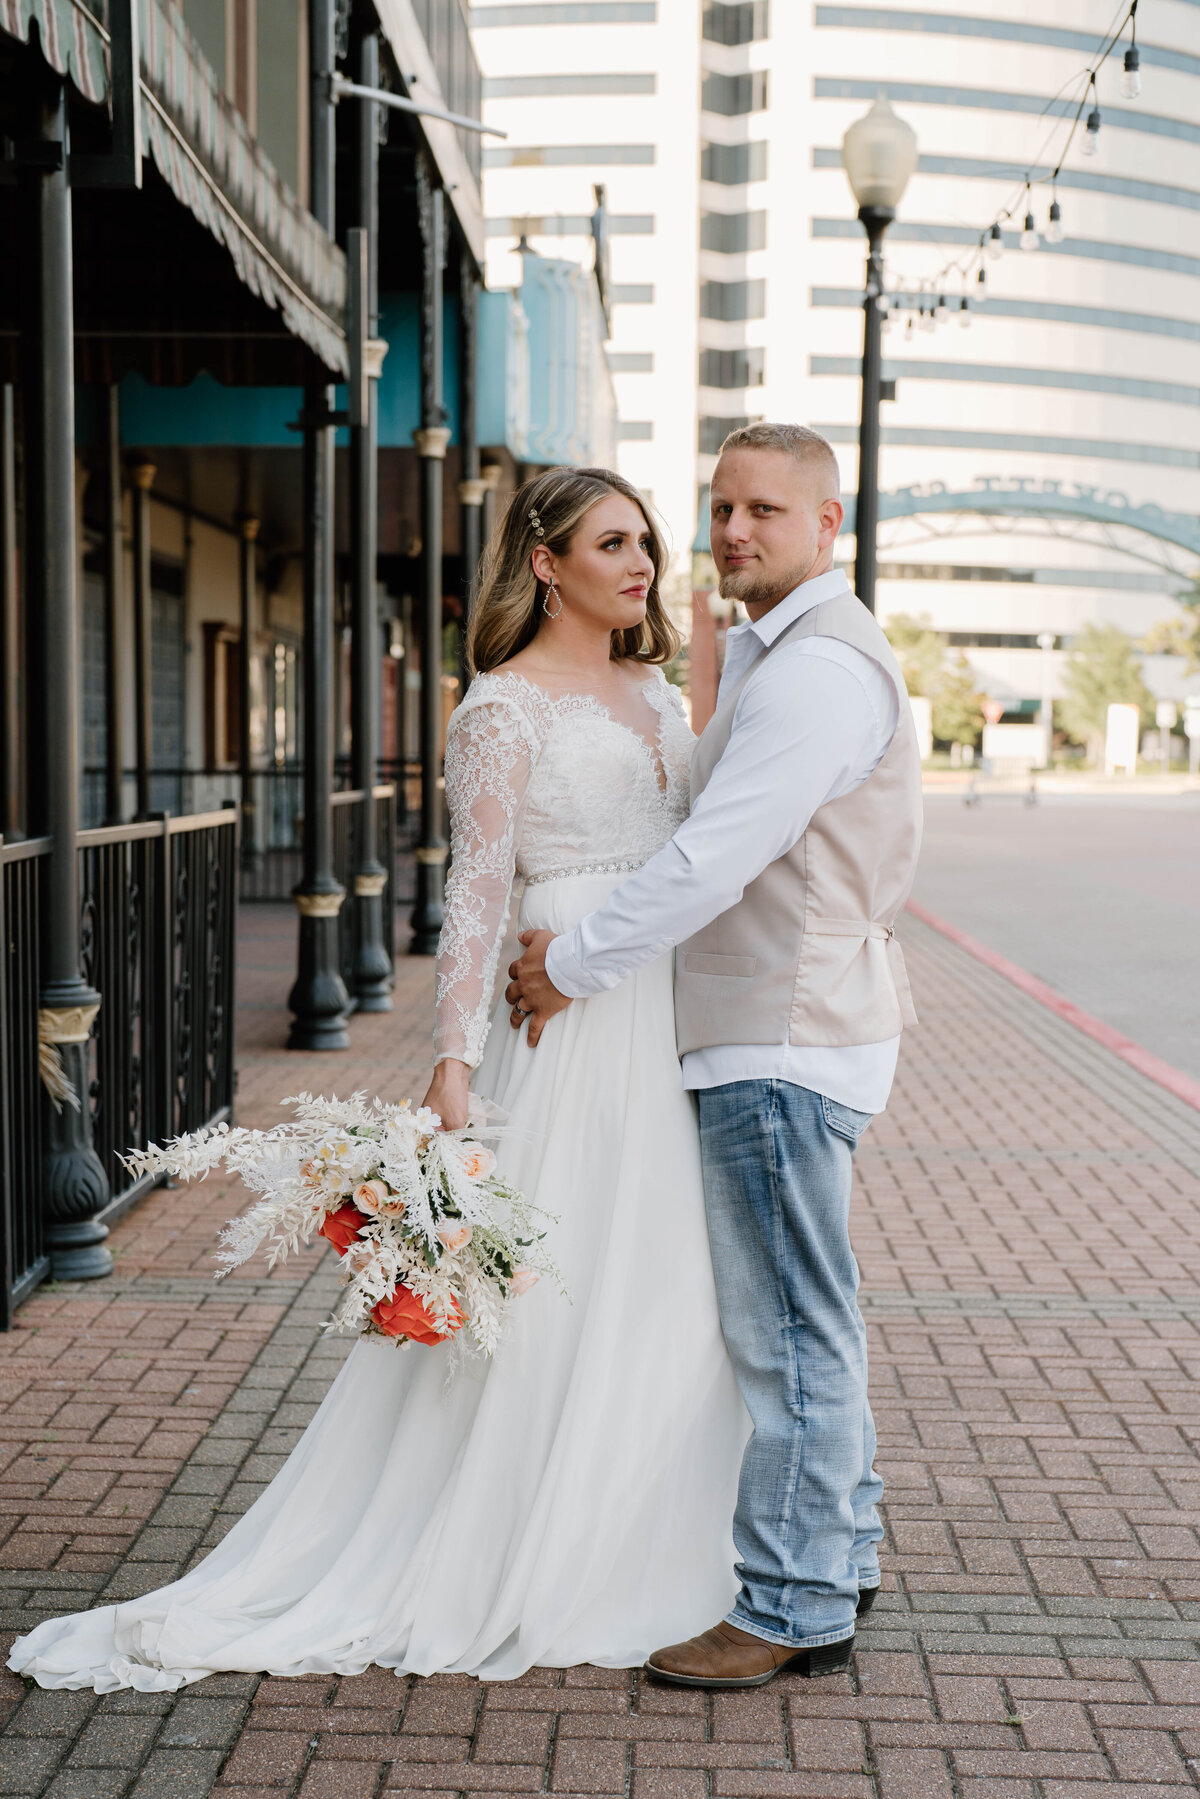 Downtown beaumont_couples wedding Session-Courtney LaSalle Photography-4